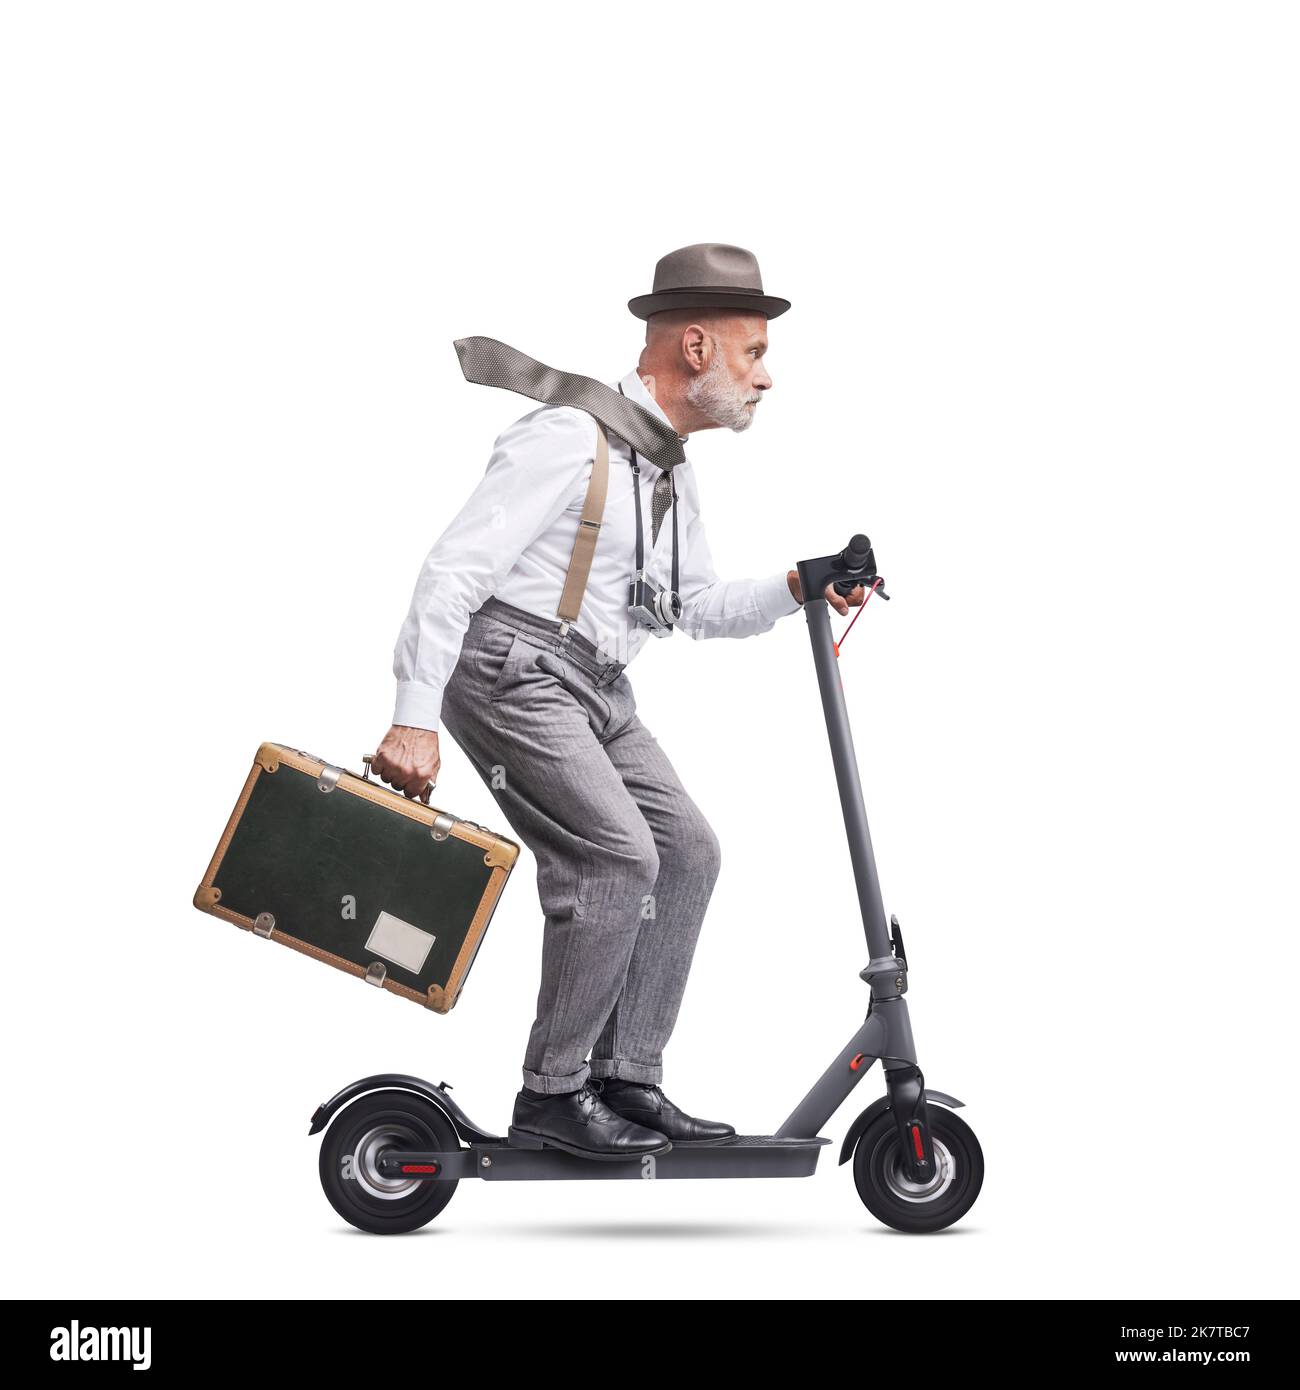 Vintage style traveler and photographer carrying a suitcase and riding an electric scooter, isolated on white background Stock Photo